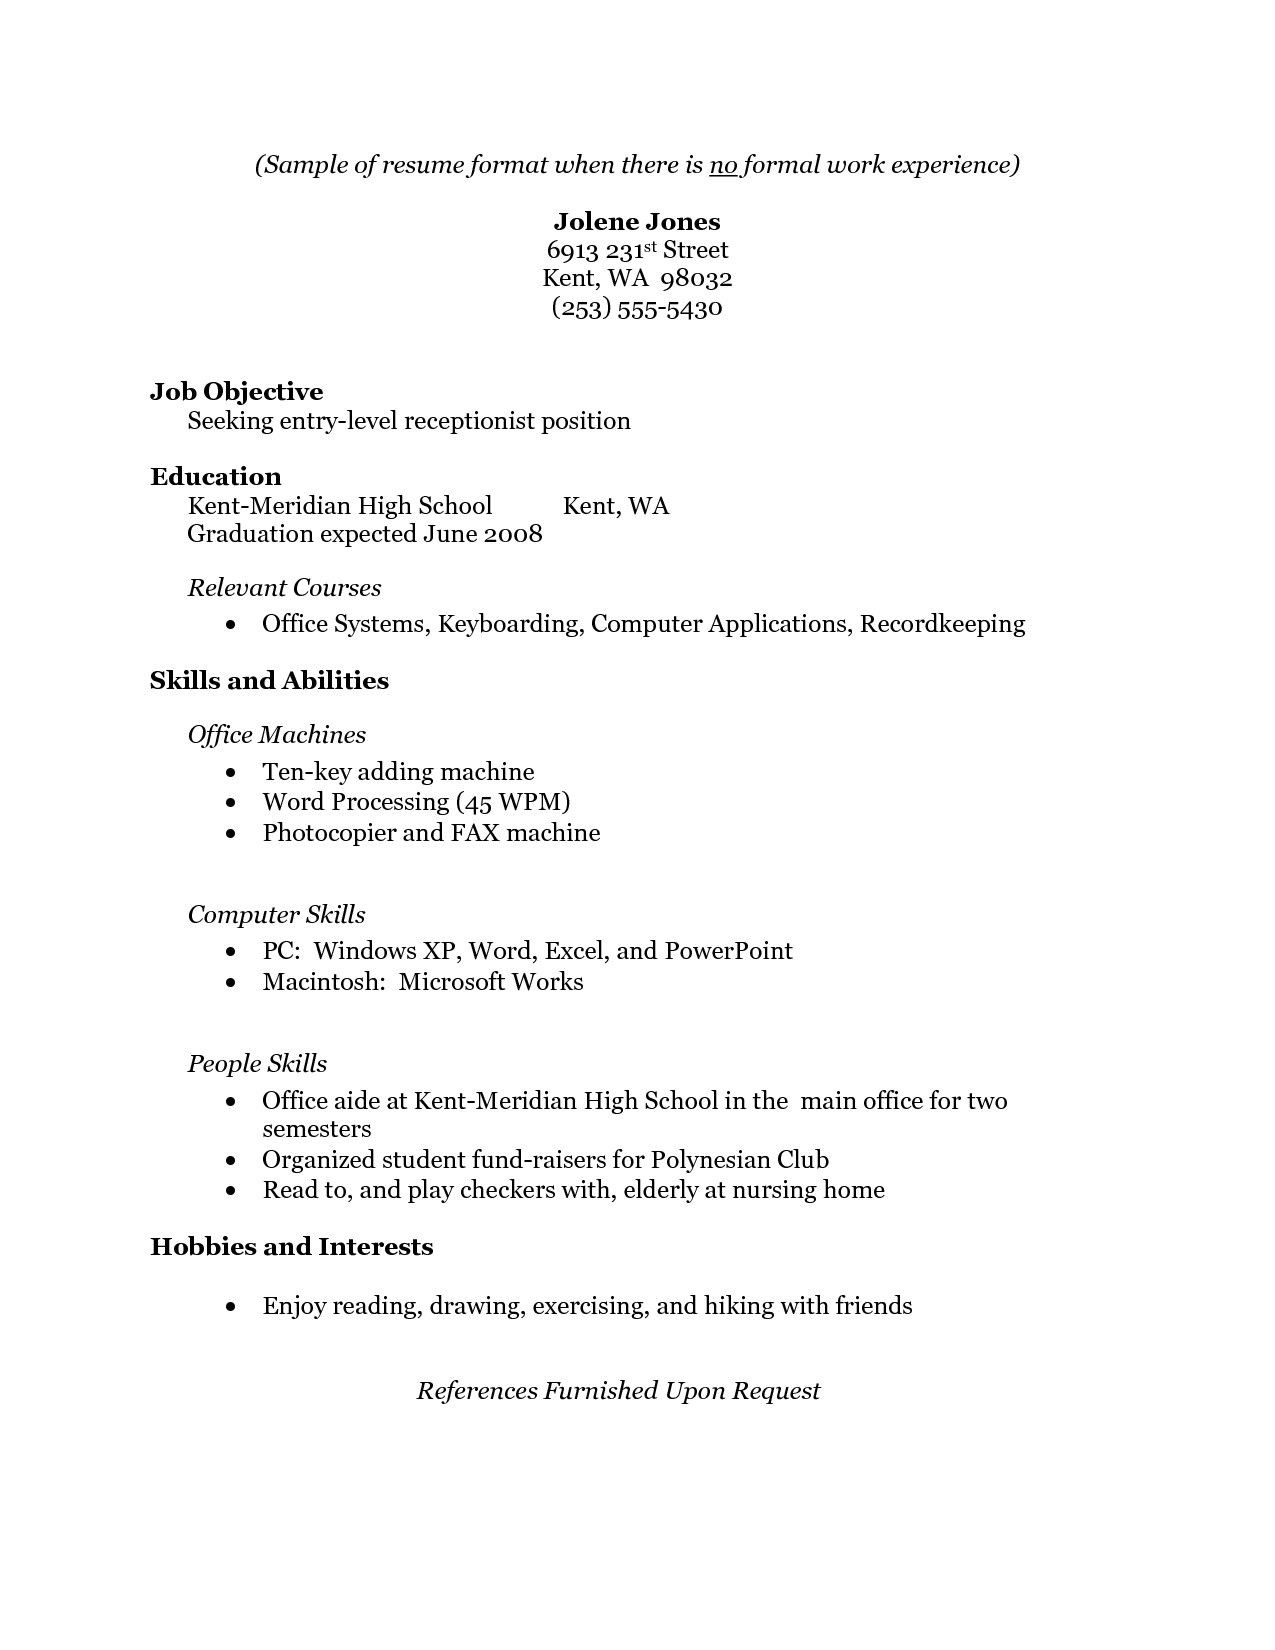 Free Resume Templates for Students with No Work Experience Free Resume Templates No Work Experience #experience …